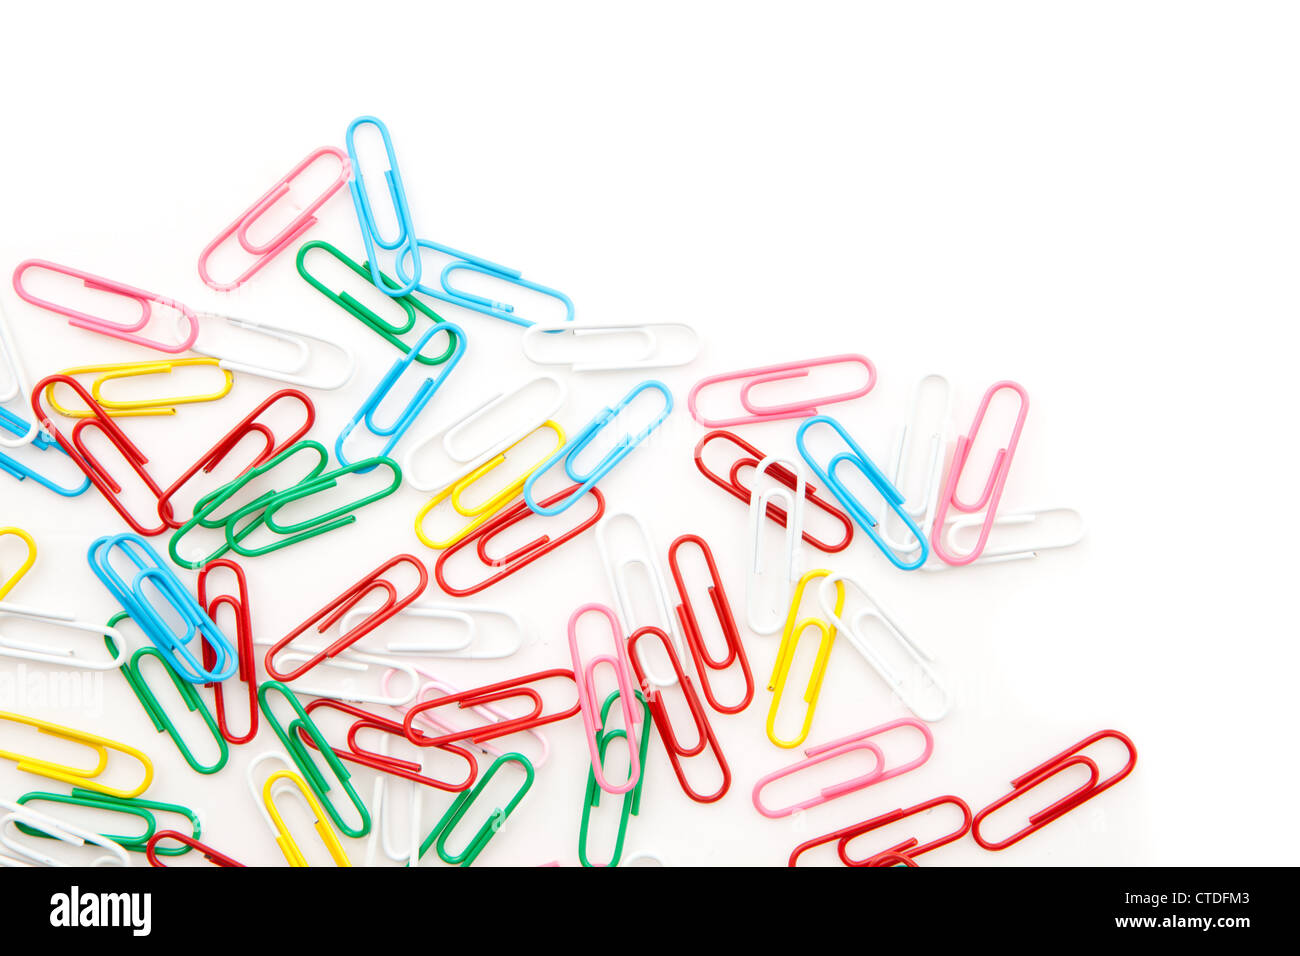 Many paper clips laid out together Stock Photo